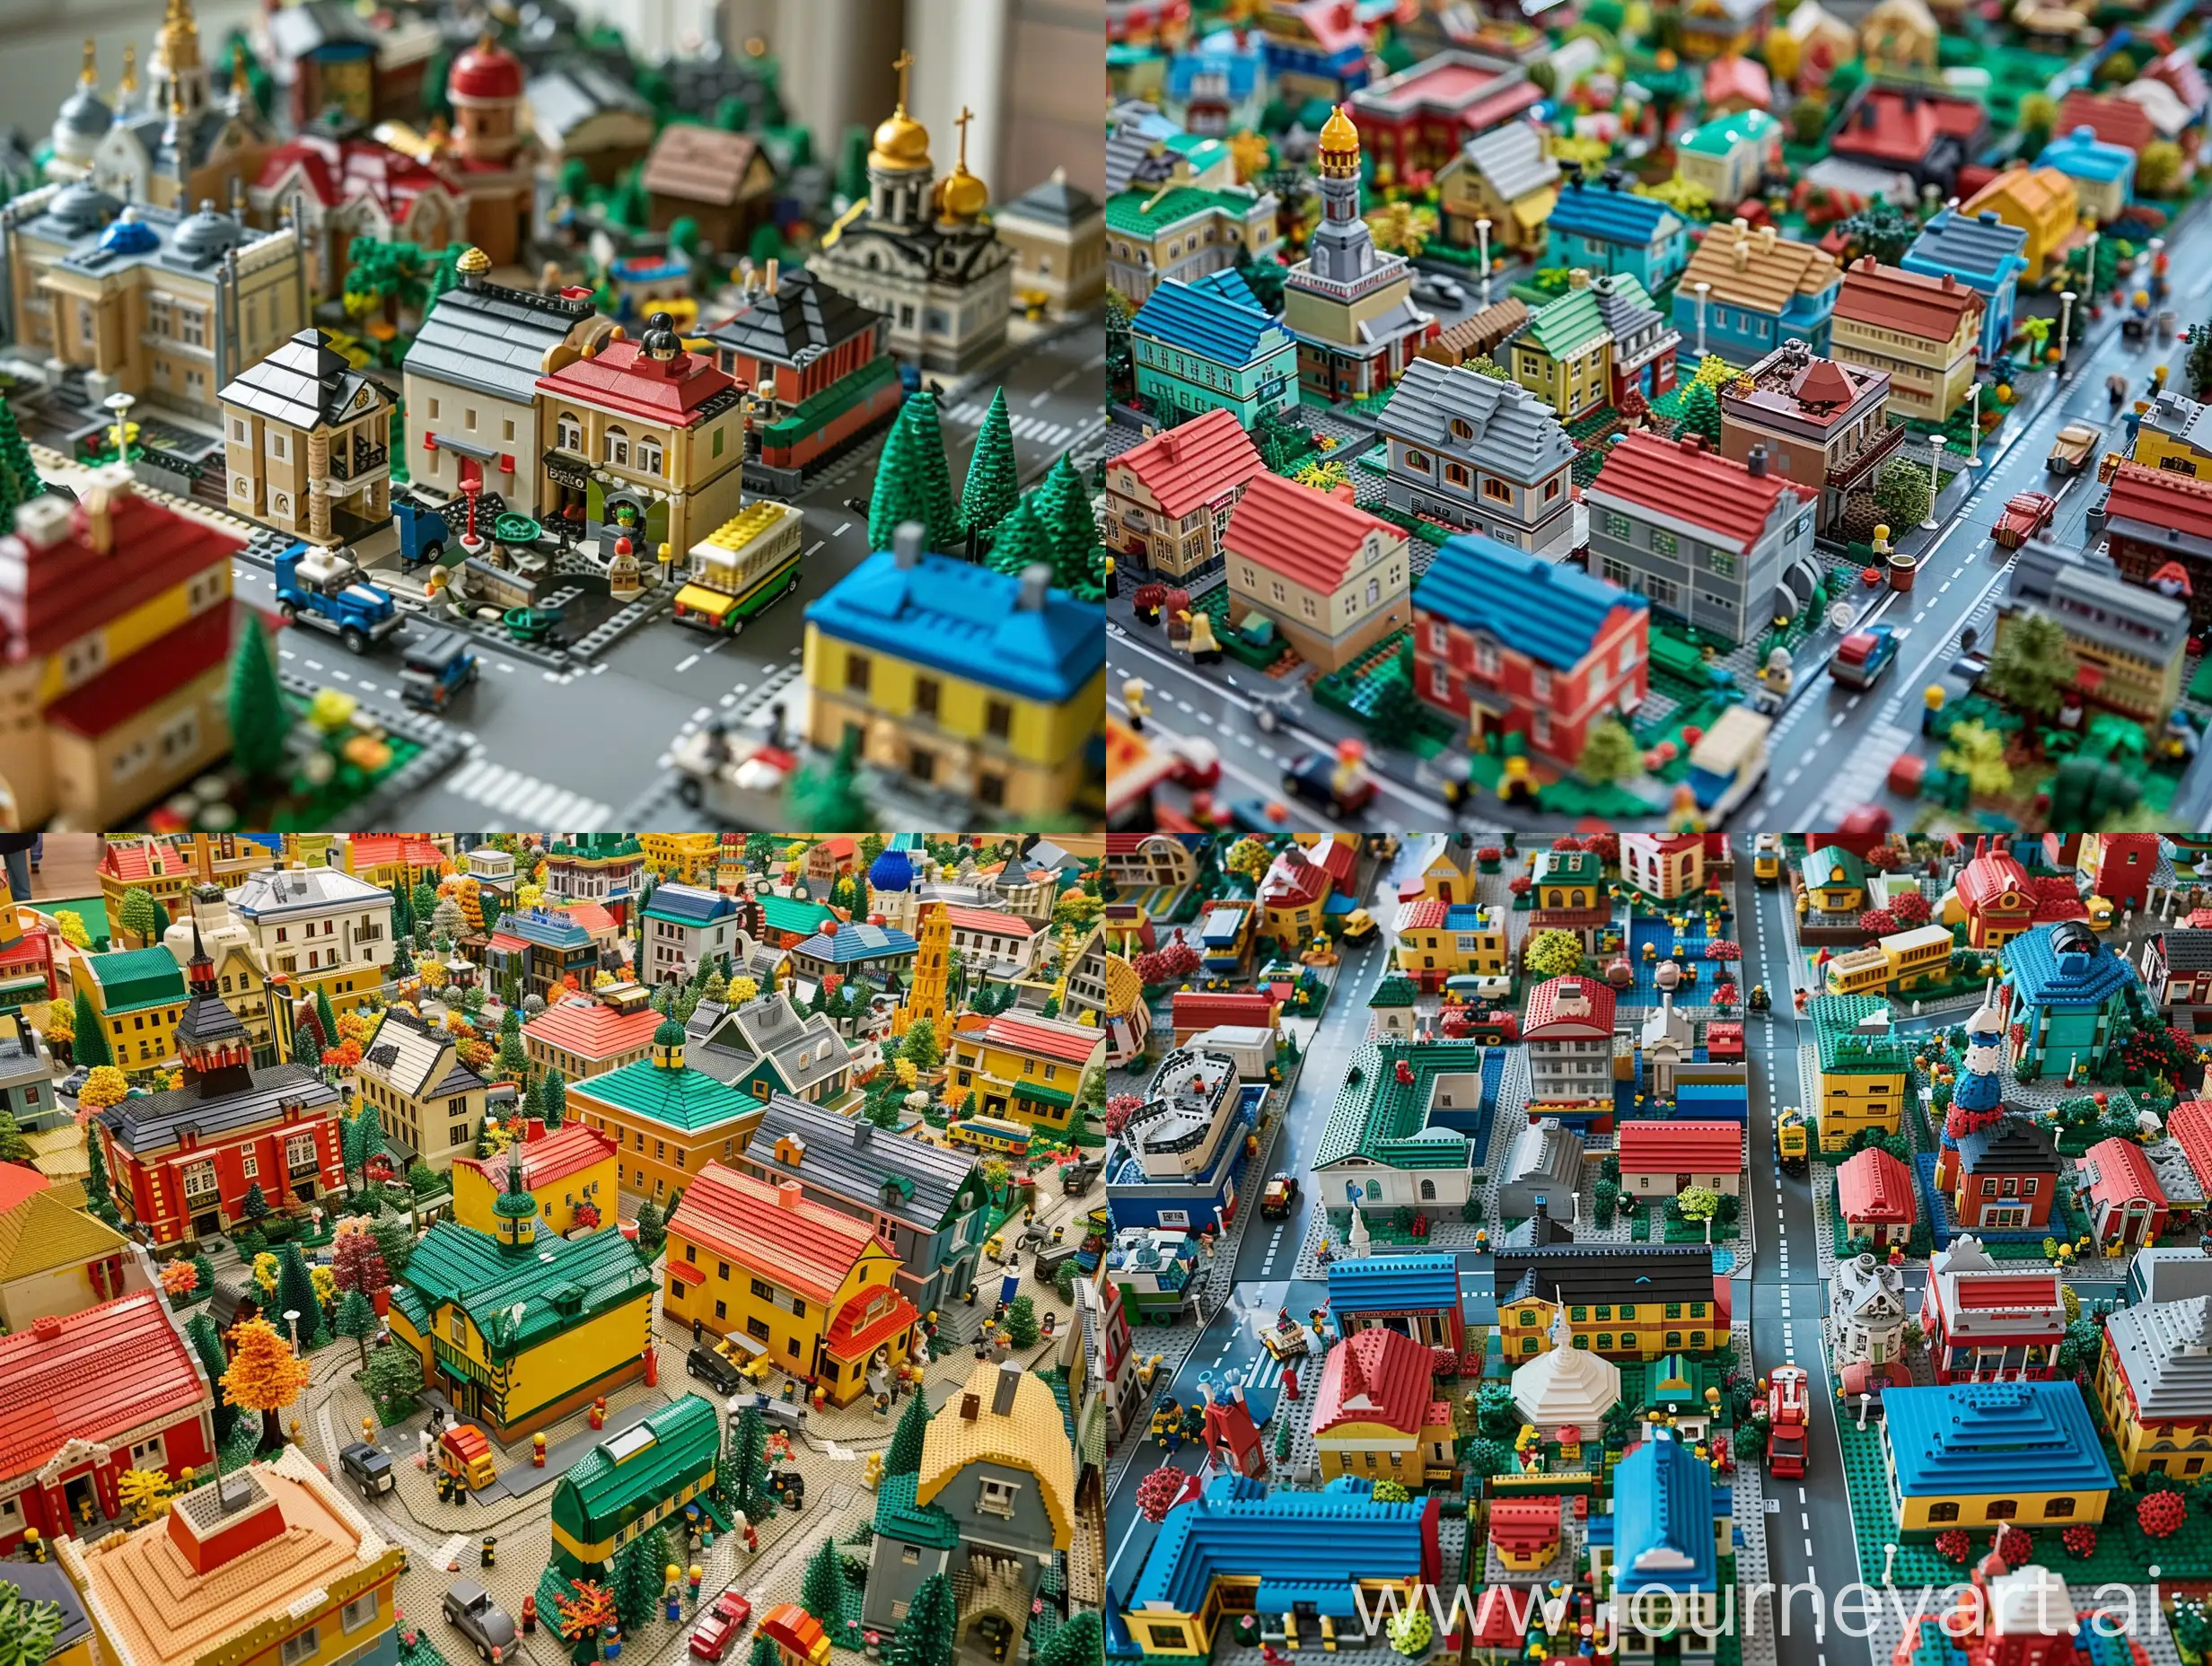 Aerial-View-of-MoscowInspired-Lego-Diorama-with-Detailed-Miniature-Landmarks-and-Whimsical-Layout